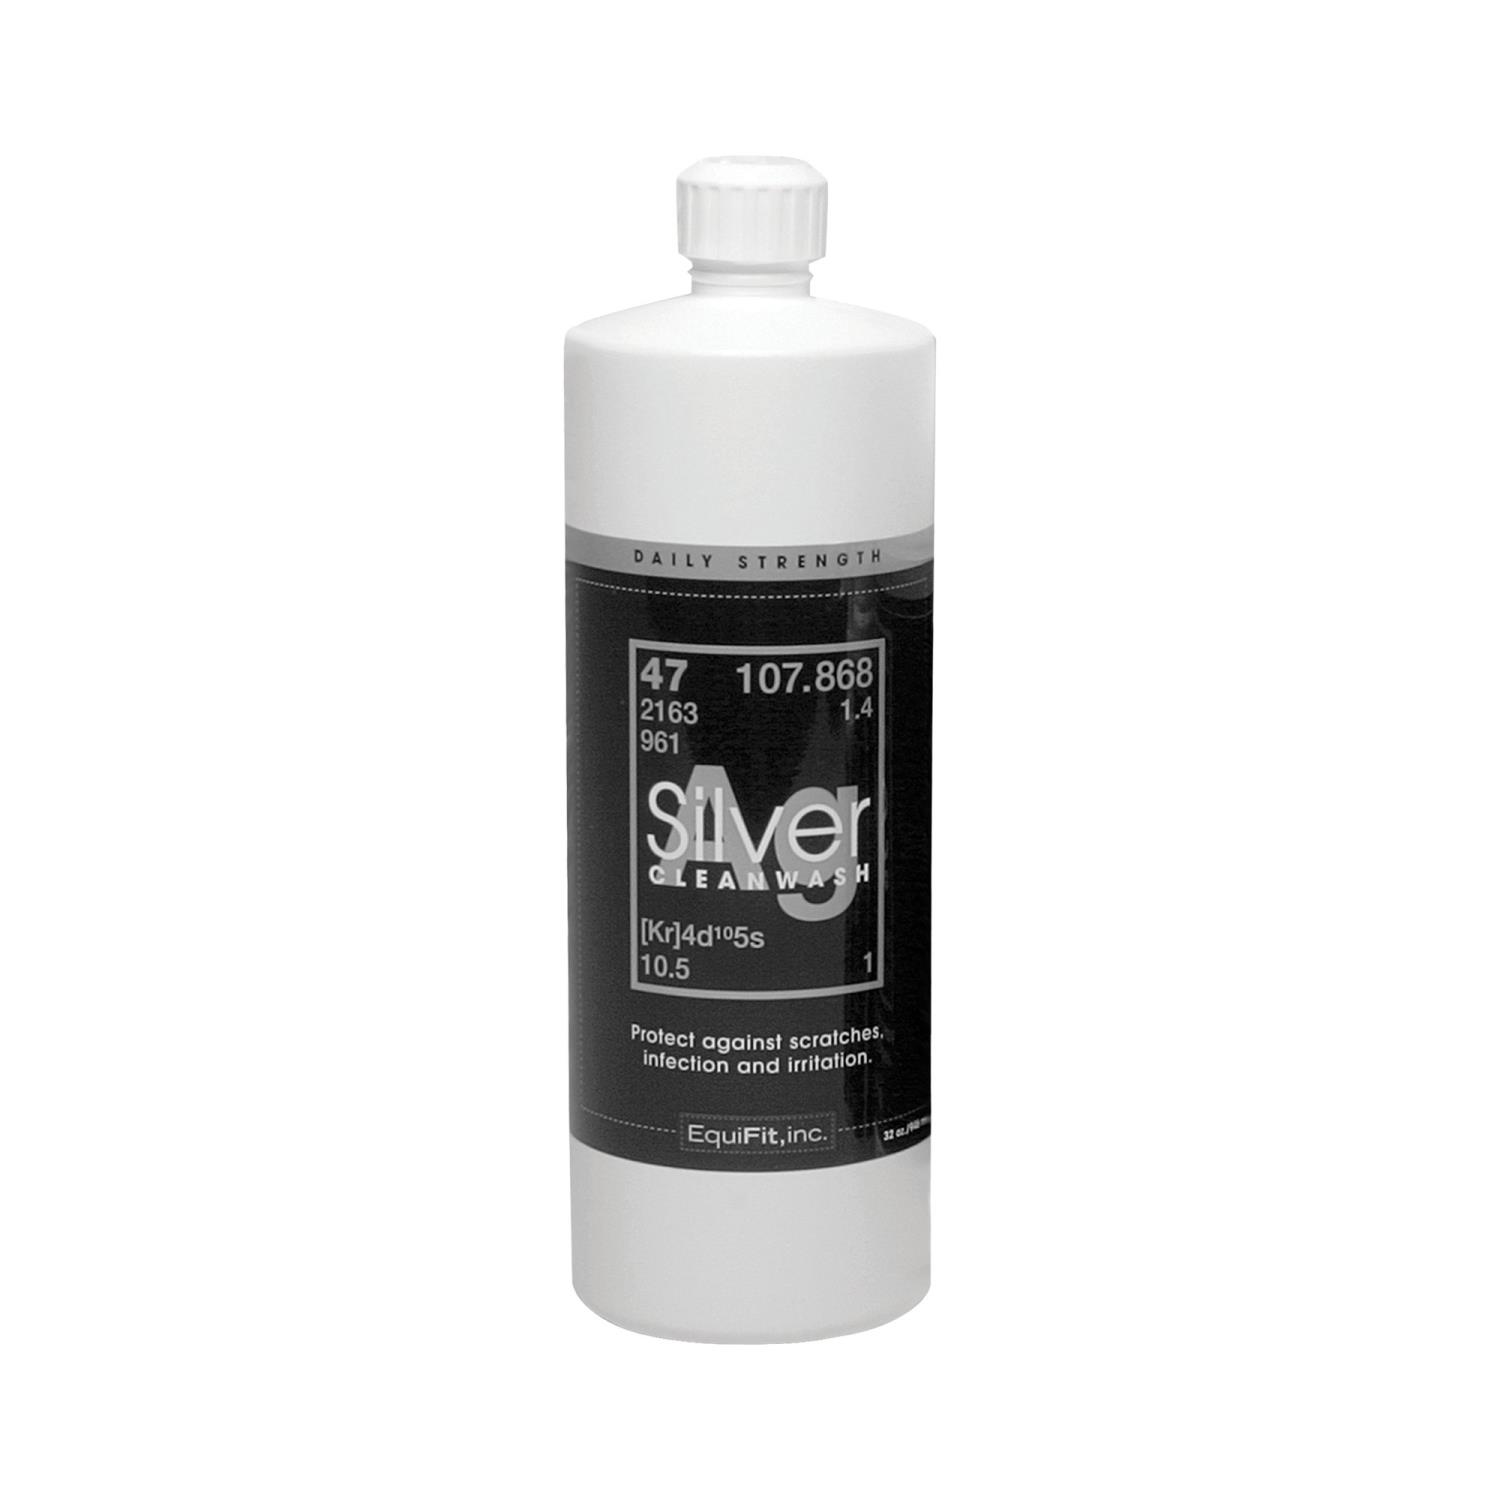 EquiFit AG silver cleanwash